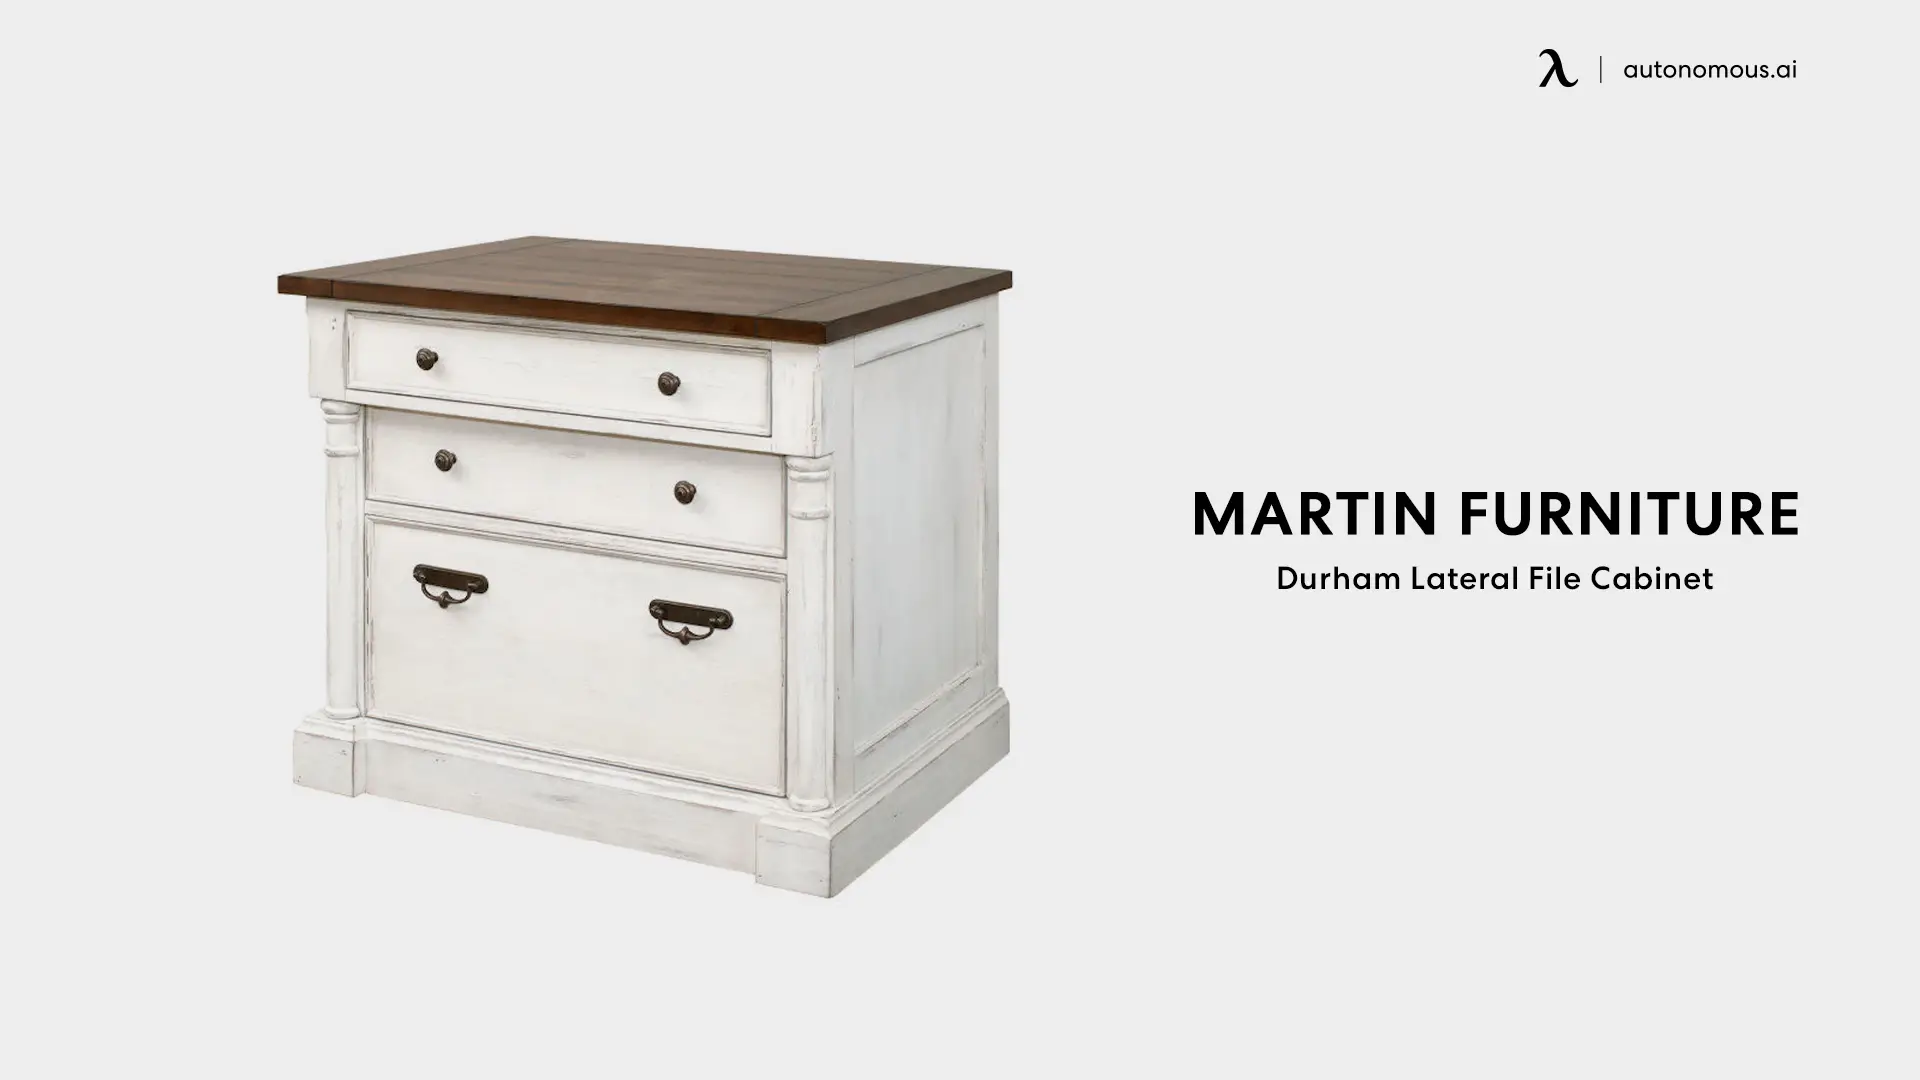 Durham Lateral File Cabinet from Martin Furniture